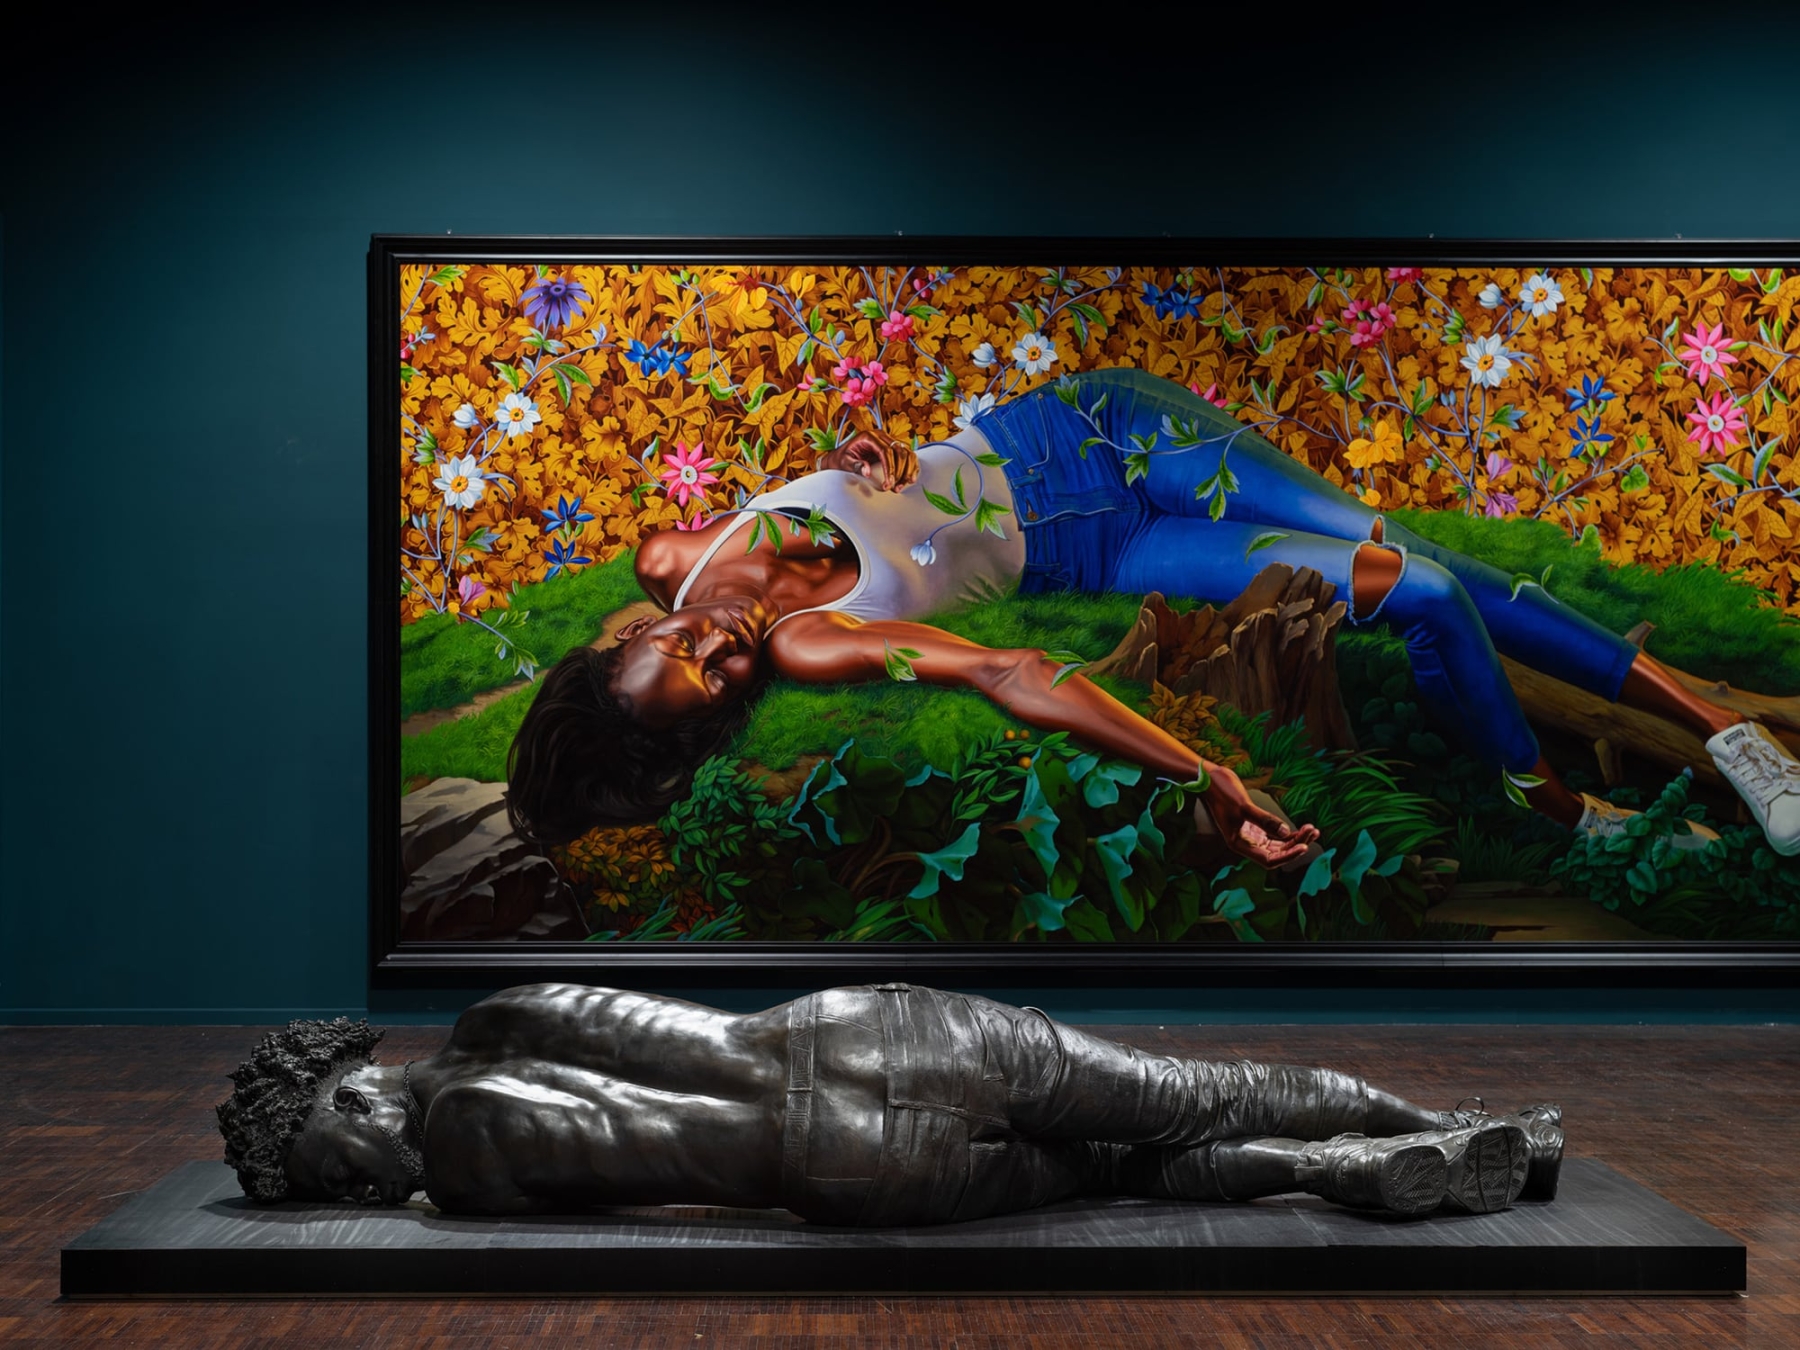 Front: &amp;ldquo;The Virgin Martyr Cecilia&amp;rdquo; (2022), bronze, 251 &amp;times; 152 3/4 &amp;times; 70 1/8 inches. Back: &amp;ldquo;Young Tarentine II (Ndeye Fatou Mbaye)&amp;rdquo; (2022), oil on canvas, 131 7/8 &amp;times; 300 inches